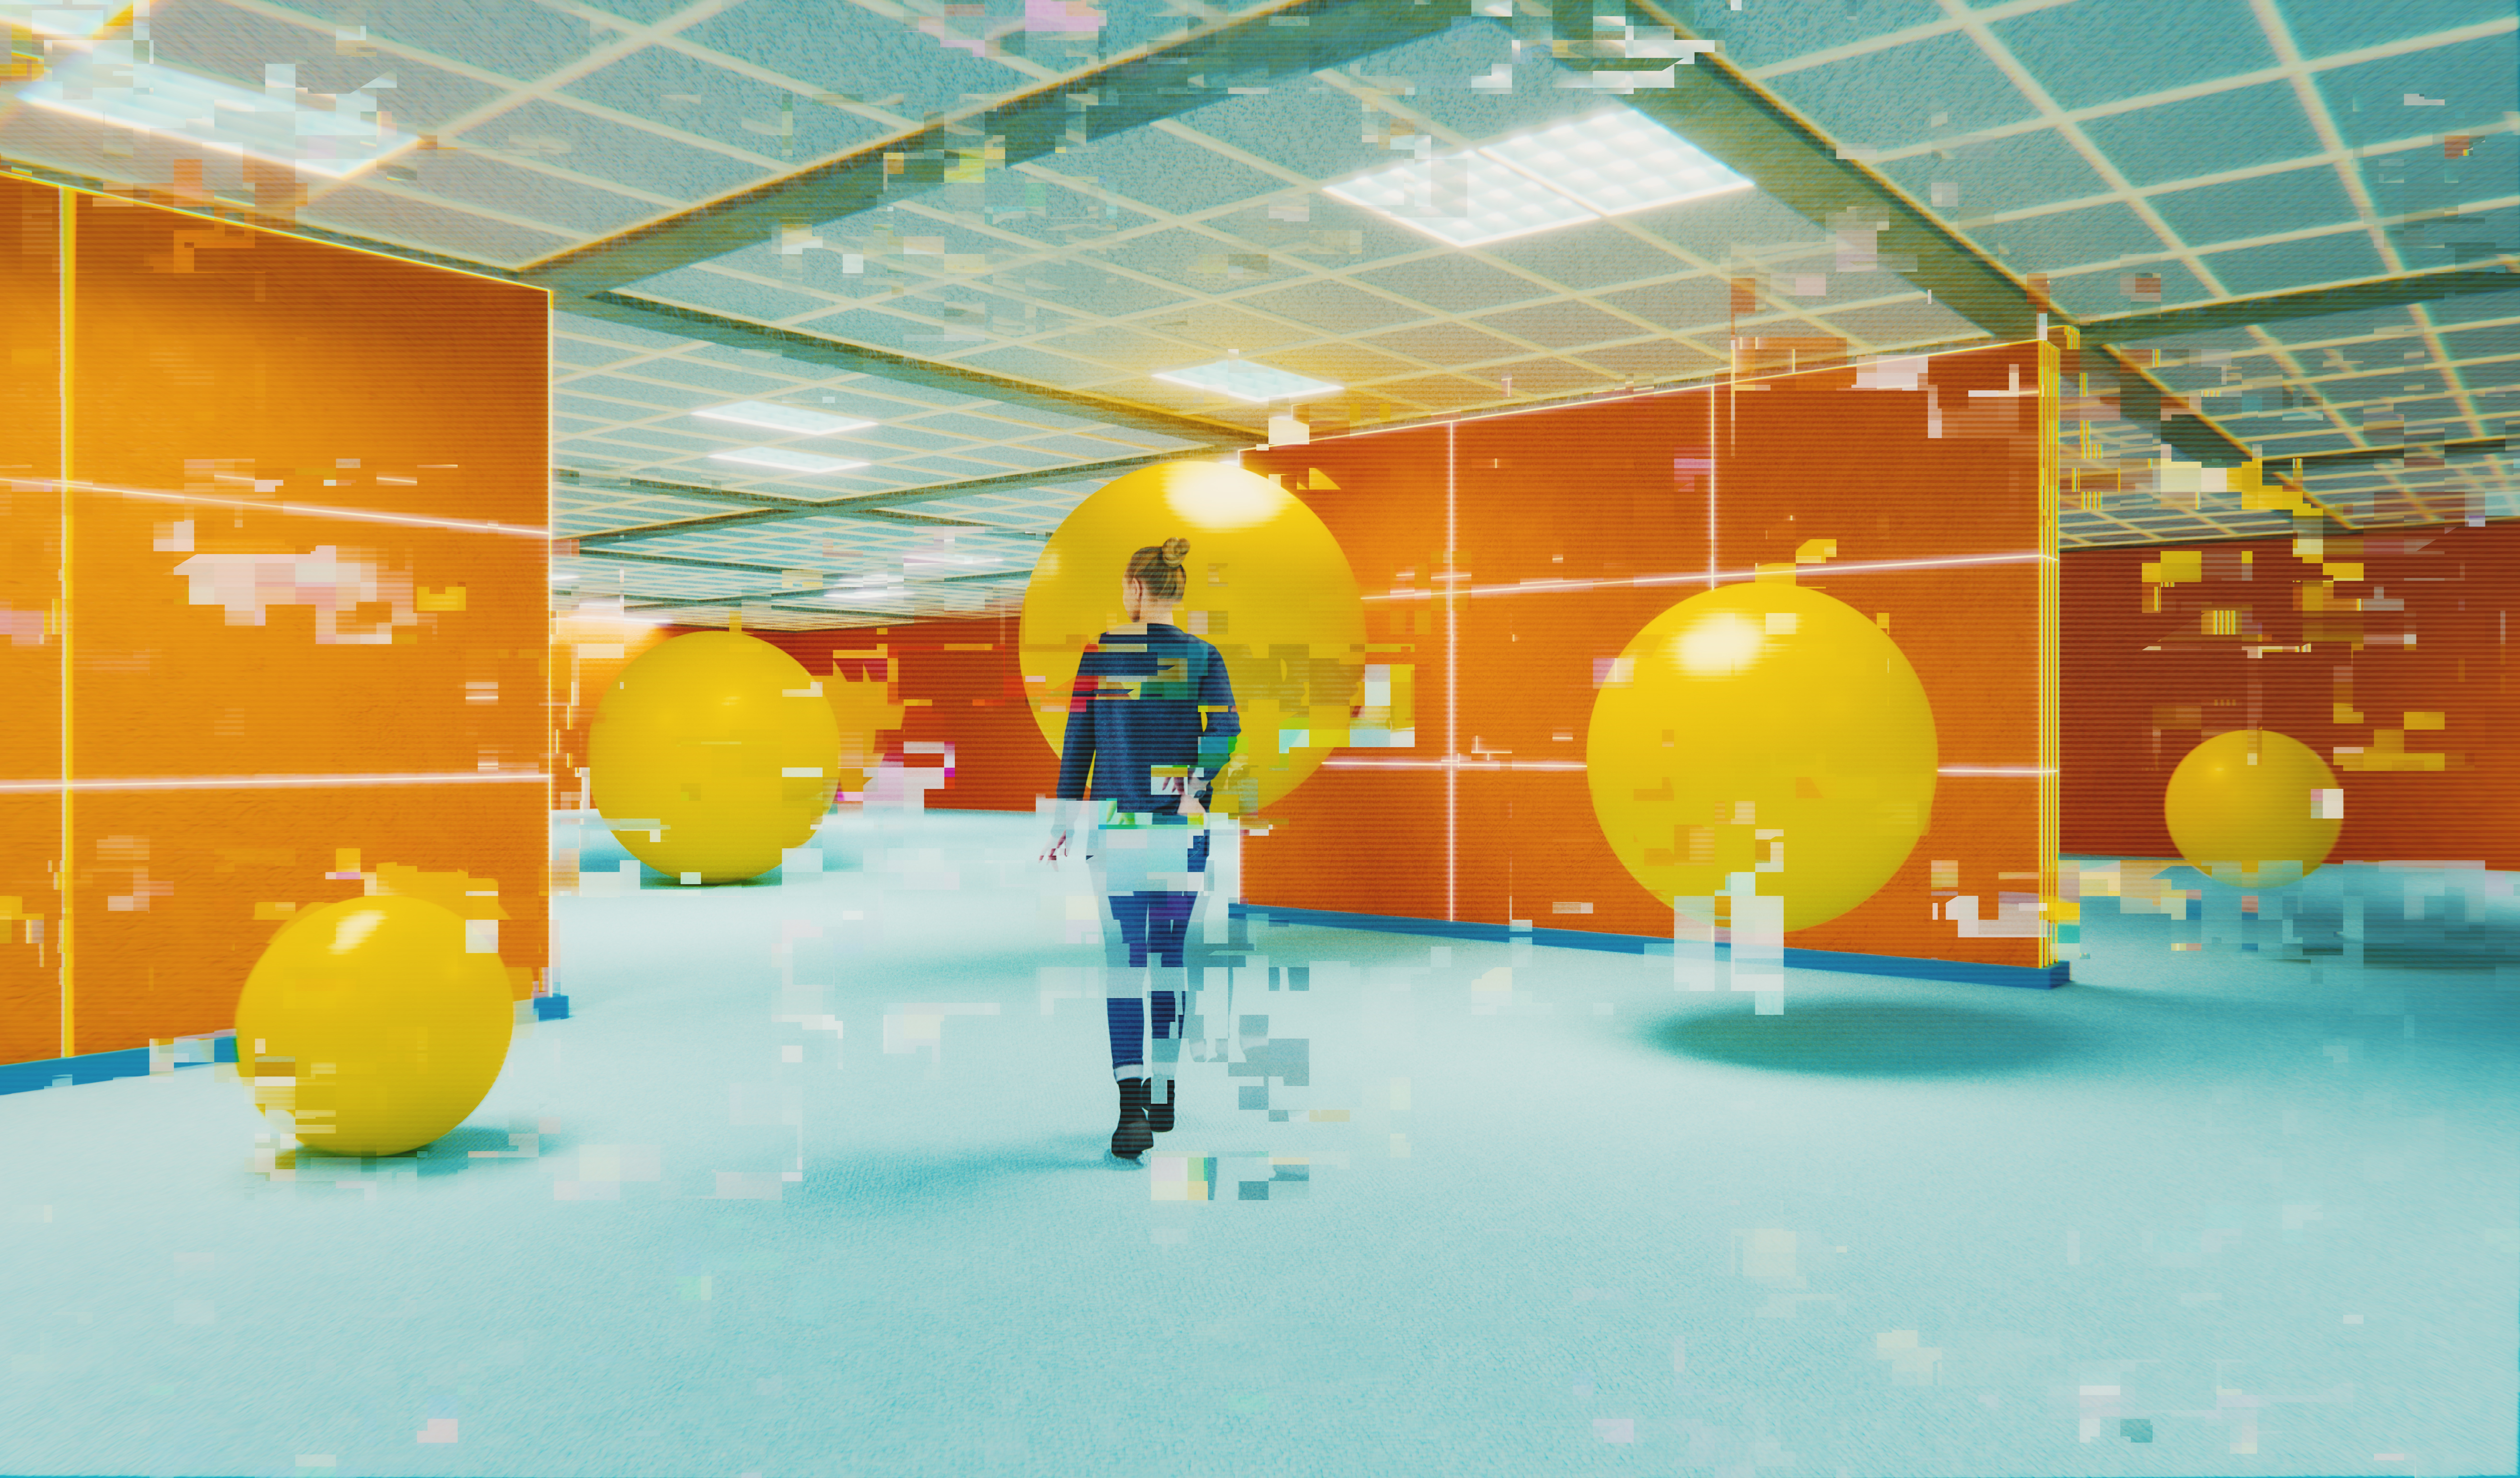 Glitchy render of casual woman walking in surreal underground retro office. 3D generated image.